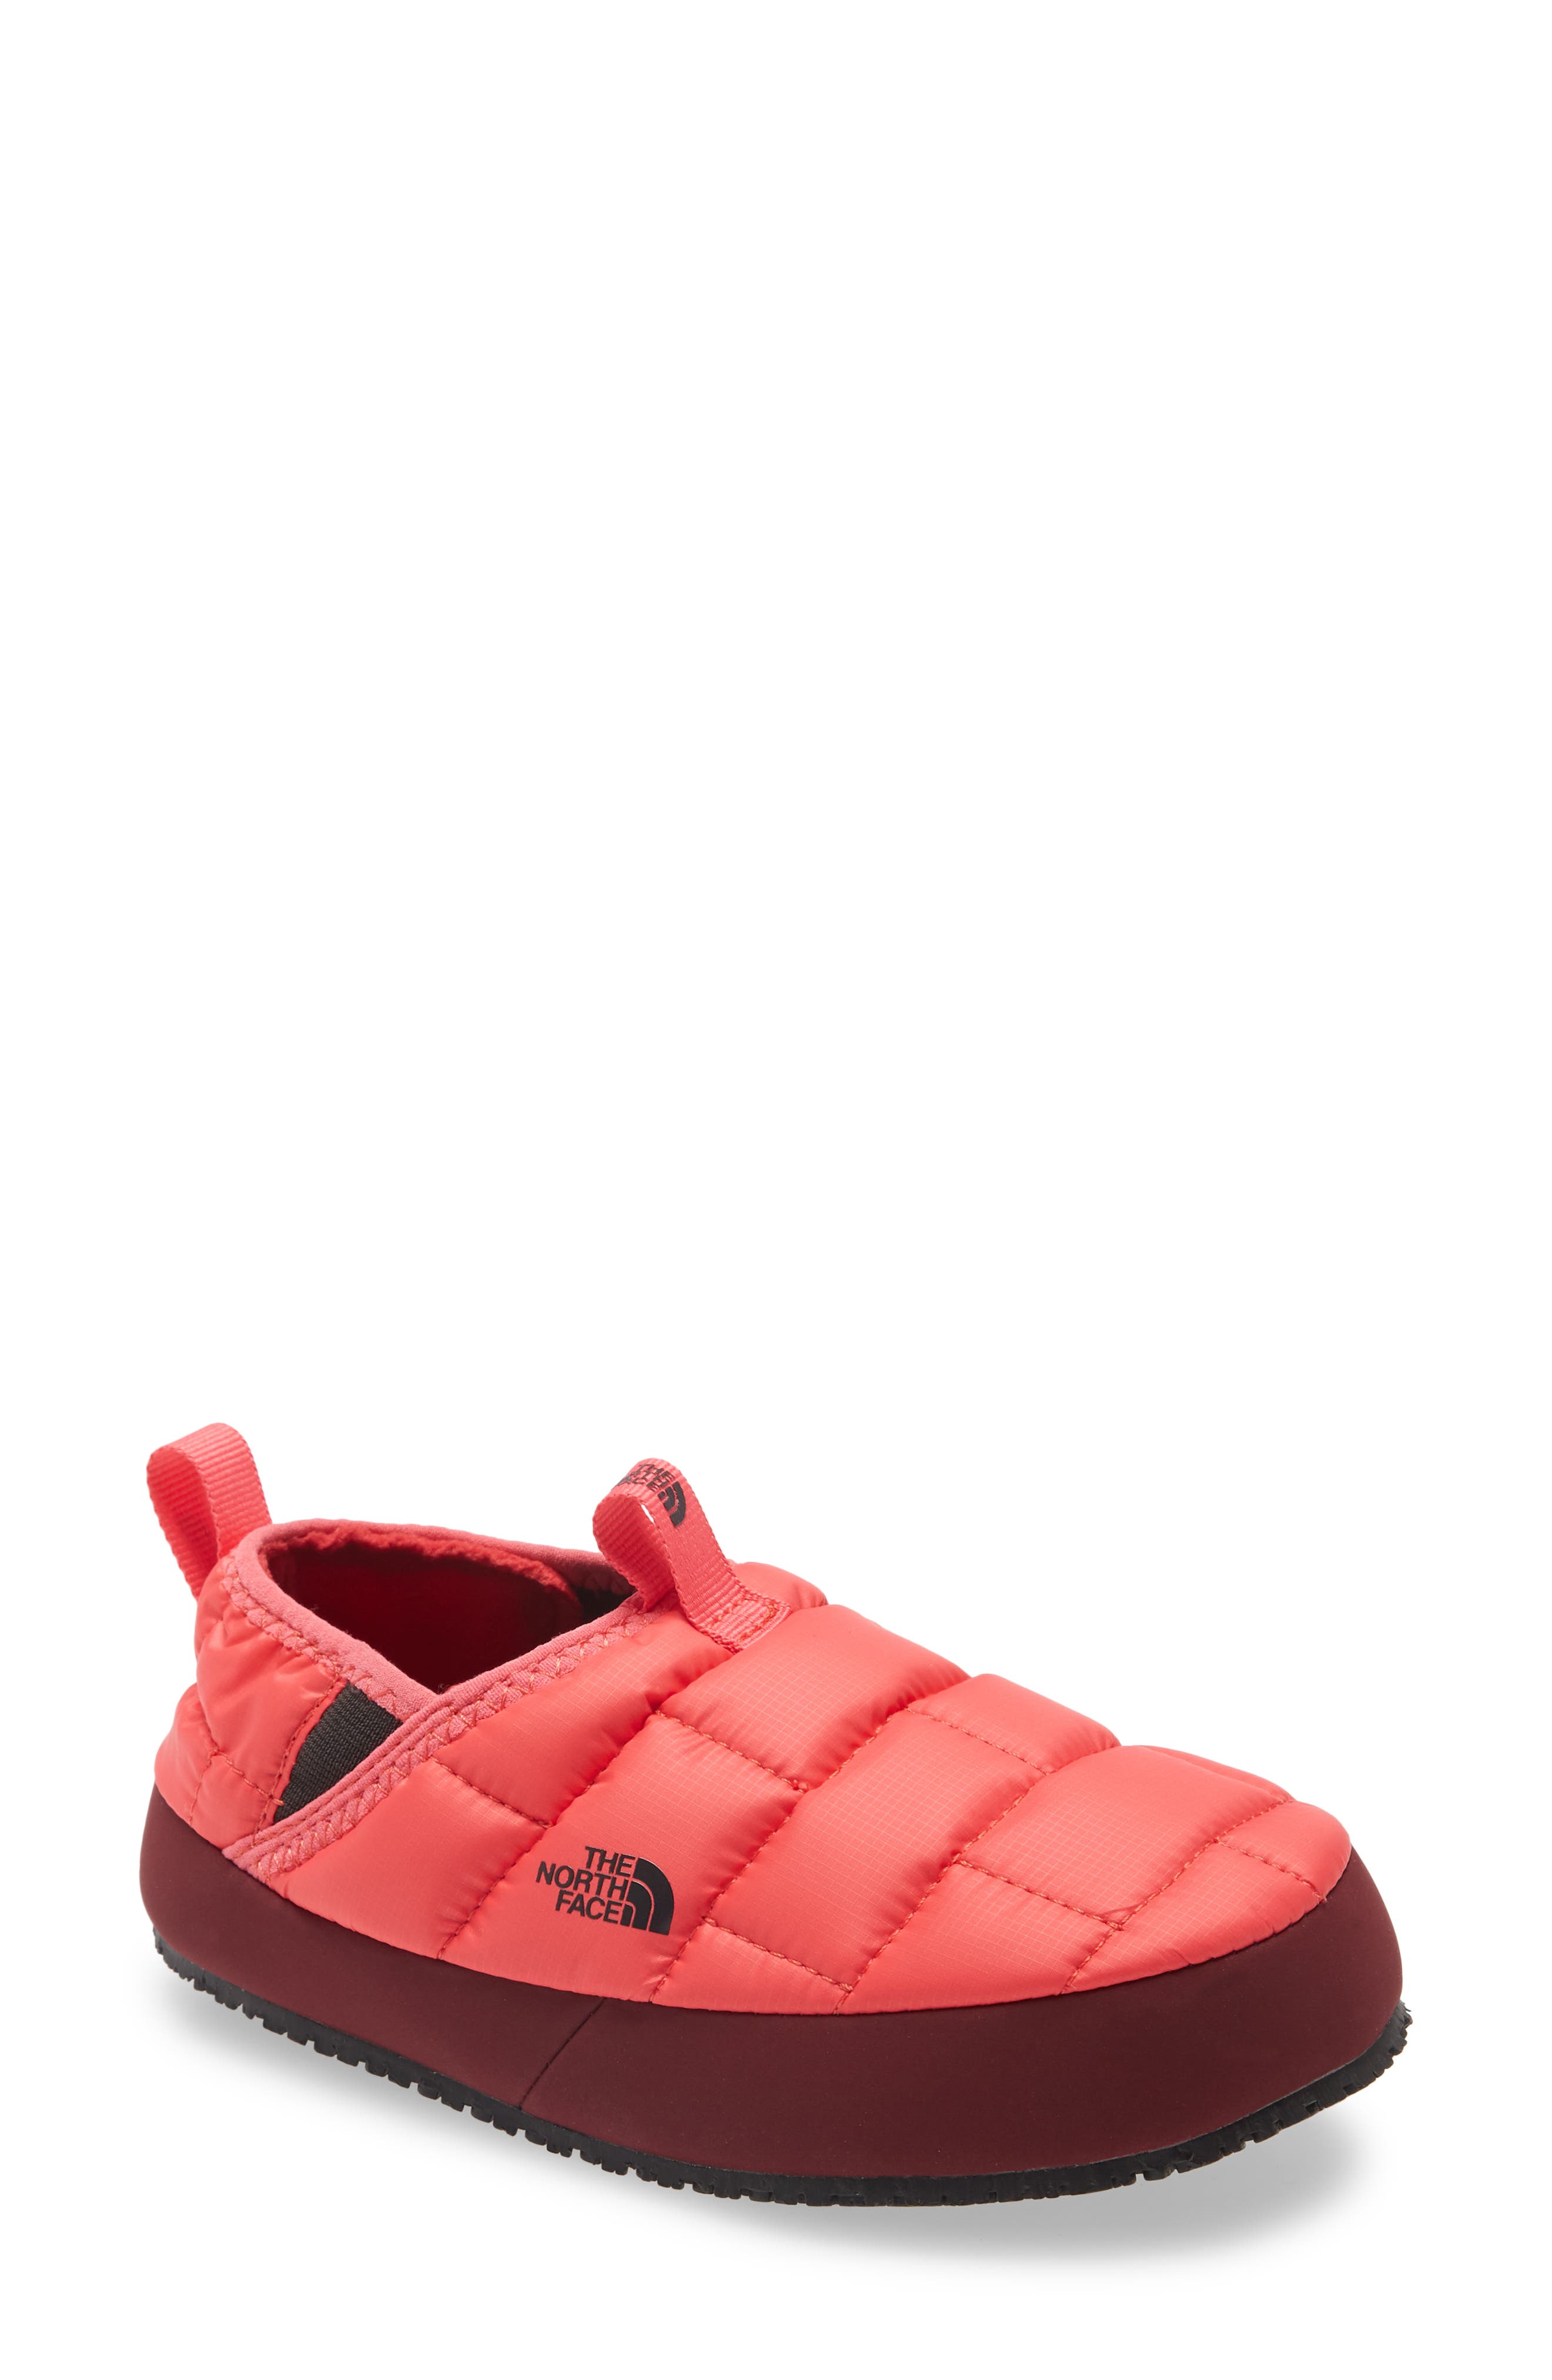 north face youth slippers